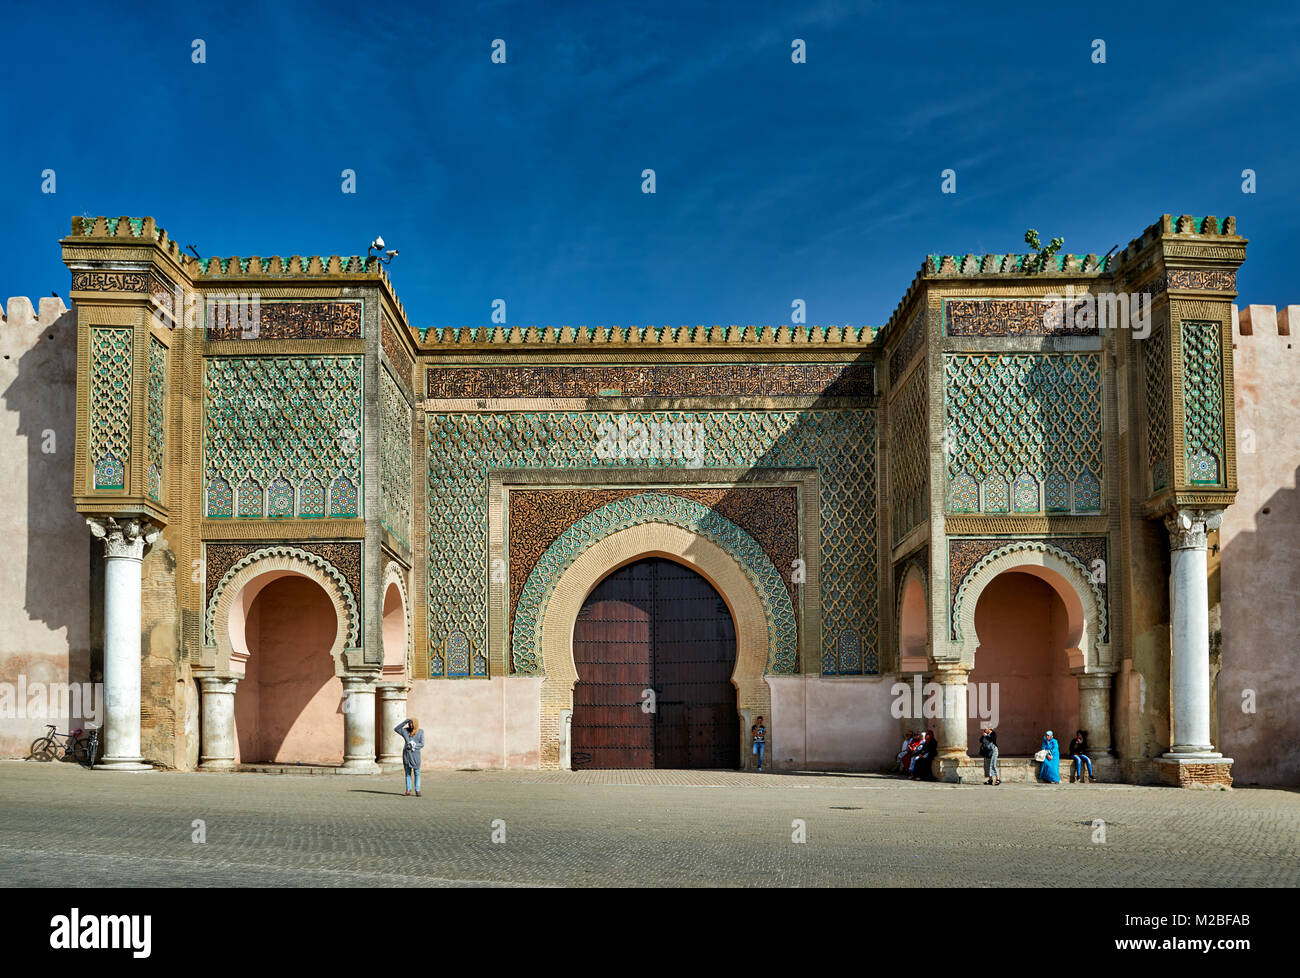 Bab Mansour city gate, Meknes, Morocco, Africa Stock Photo